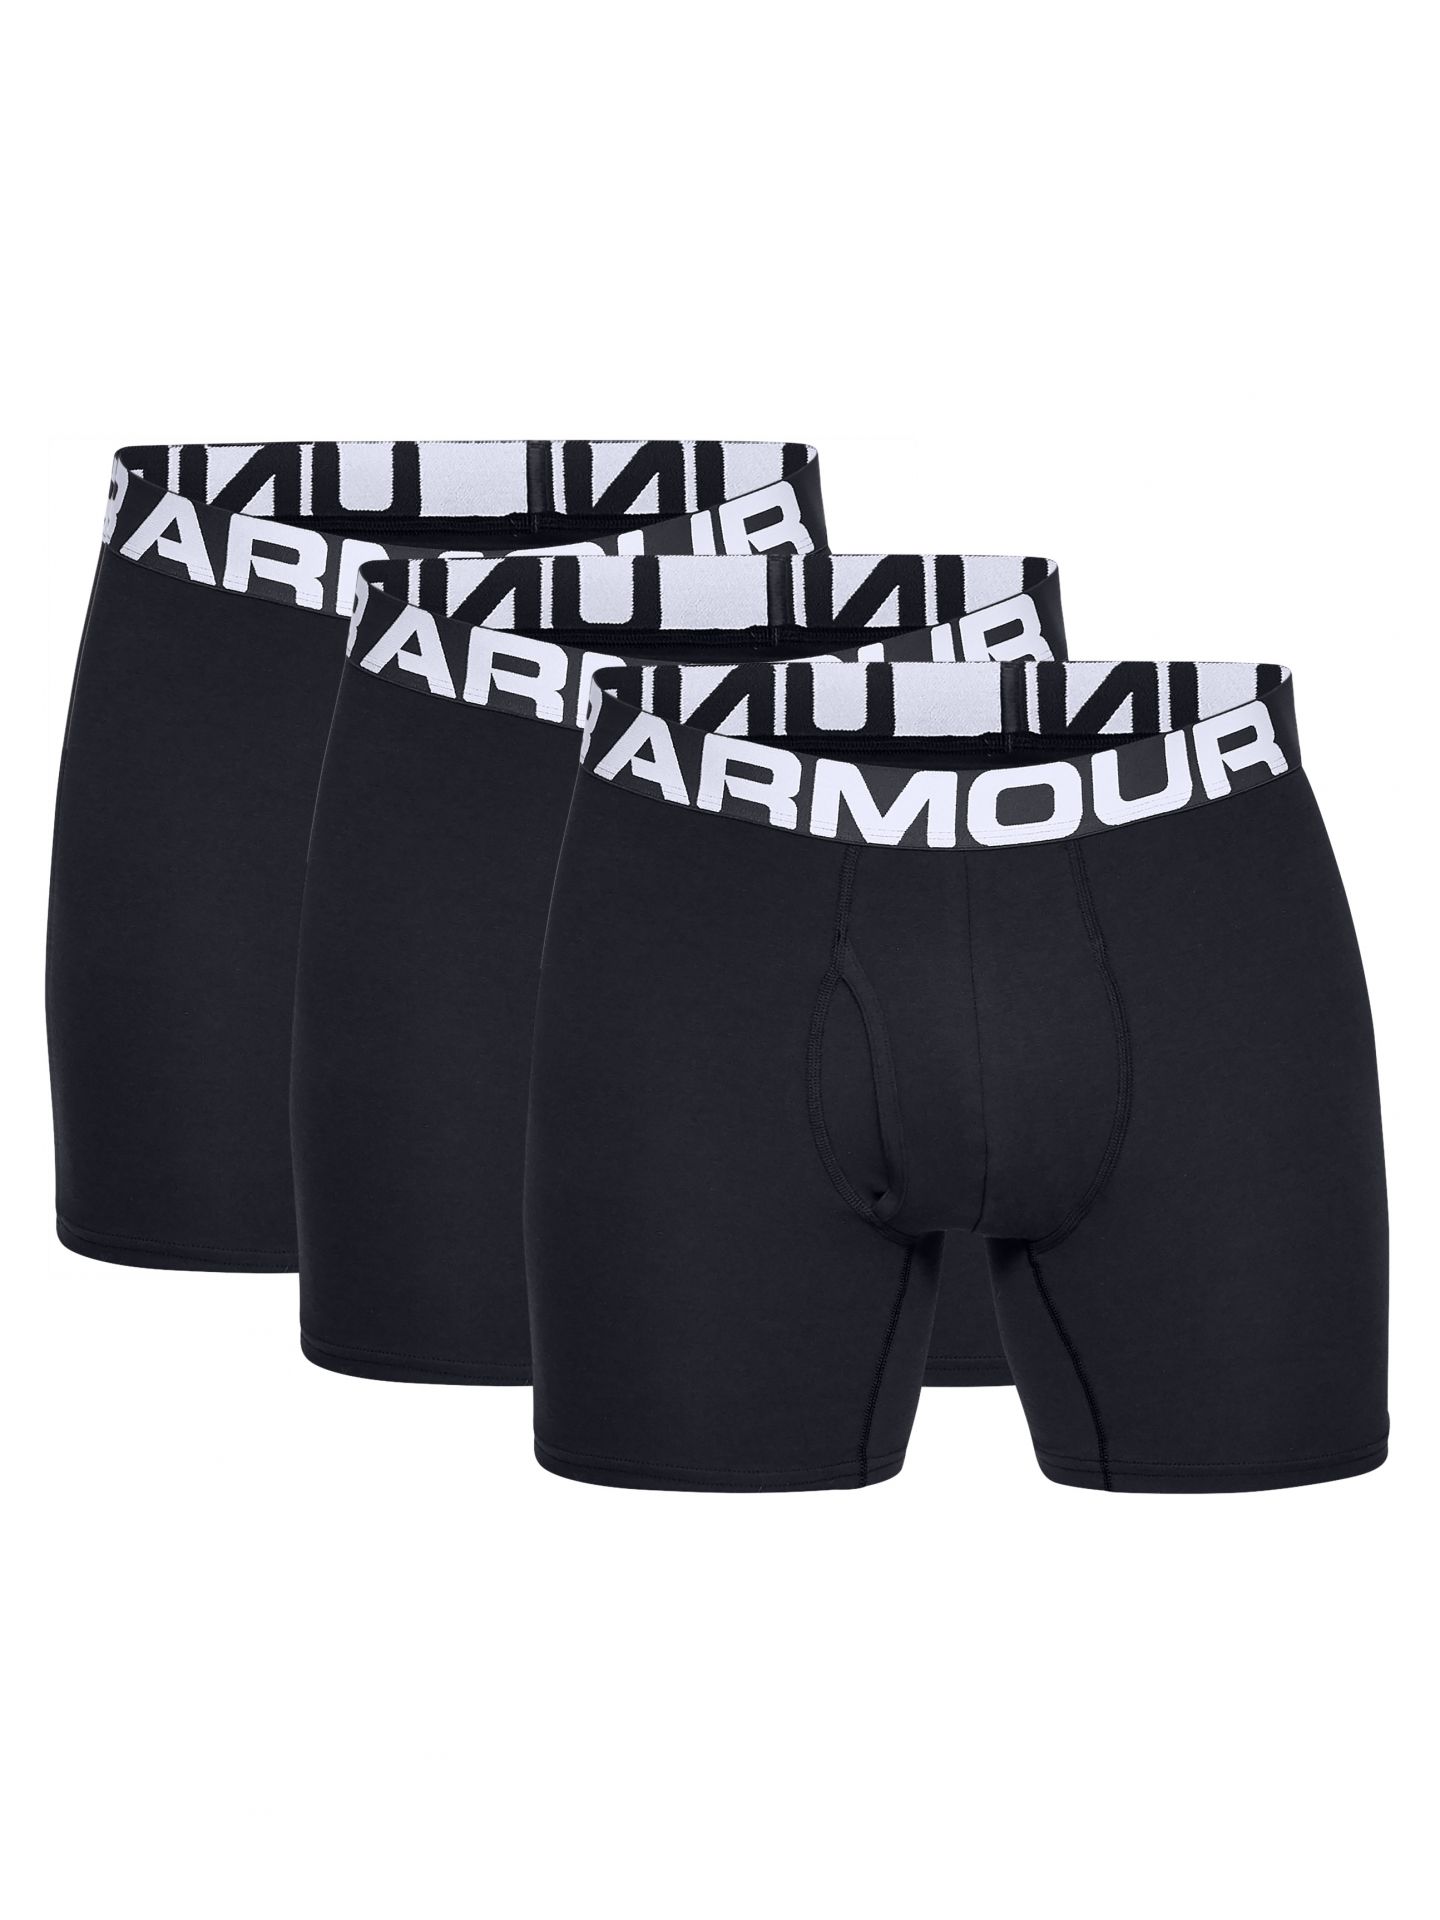 Under Armour Men's Charged Cotton 6-Inch Boxerjock - 3 Pack 1327426